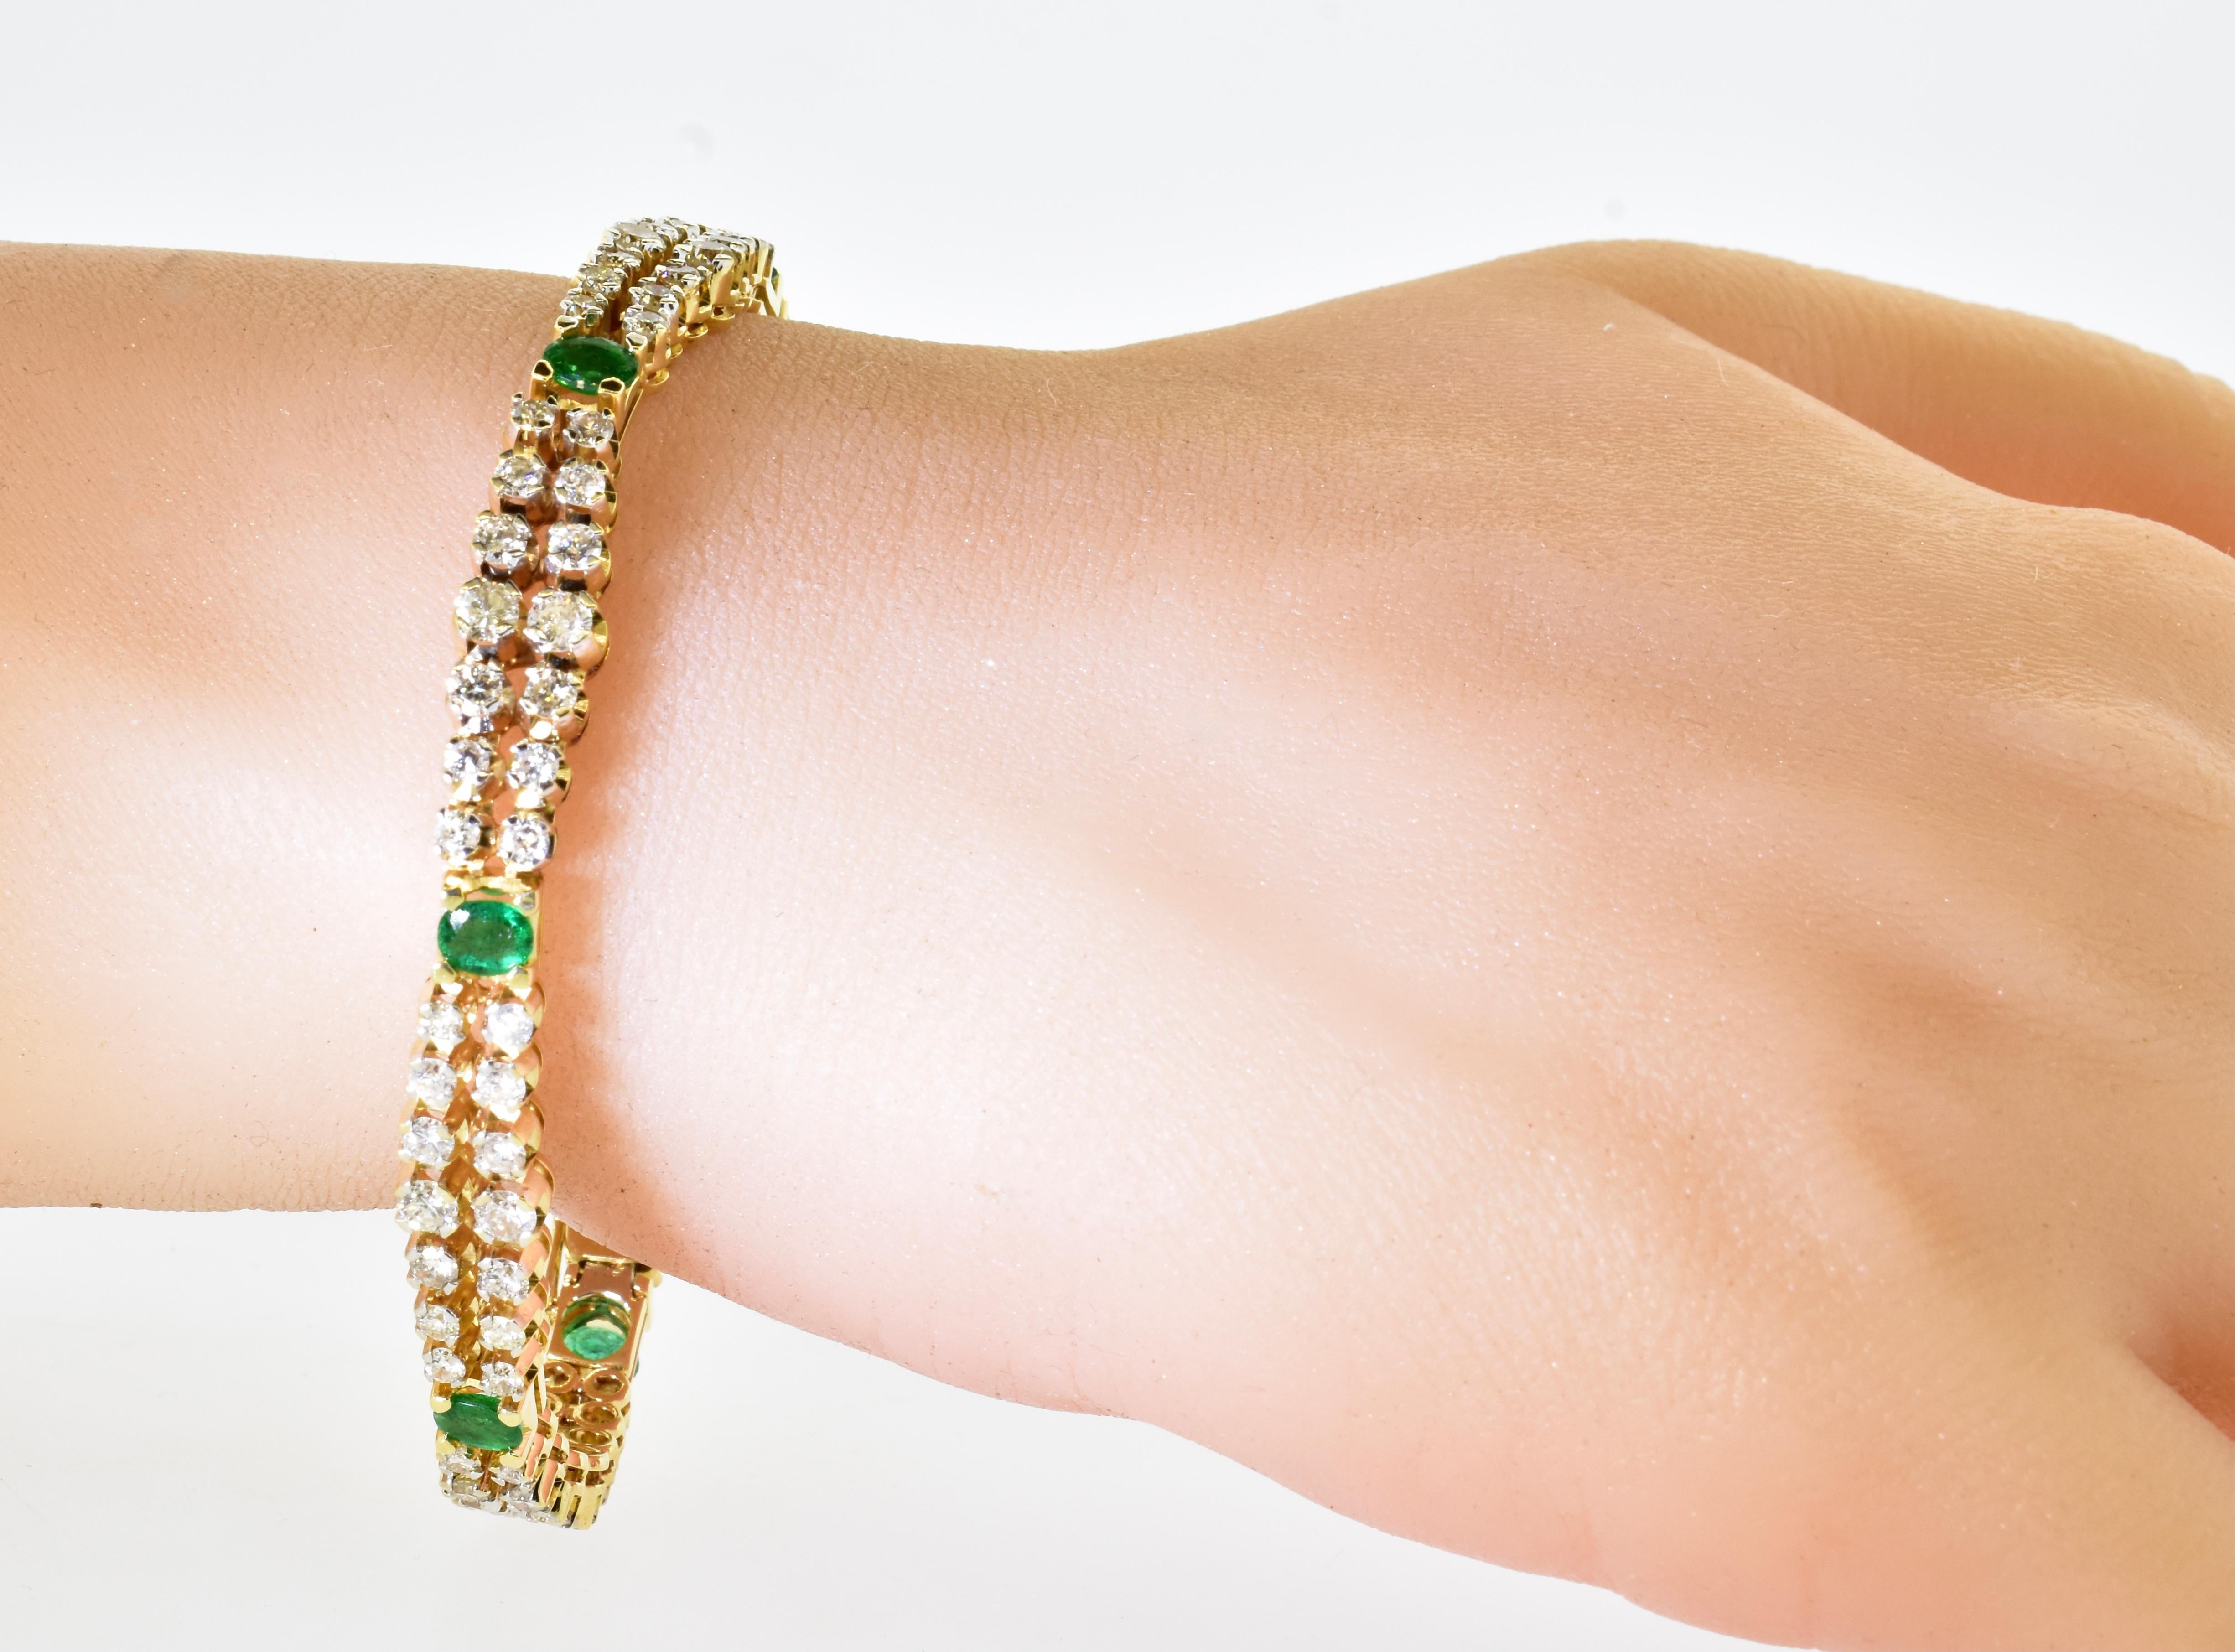 Emerald and diamond bracelet in yellow gold, this flexible bracelet holds 6 oval natural green emeralds , all well matched in this bright green color, they are estimated to weigh 1.25 cts. totally.  There are a total of 90 white diamonds all near